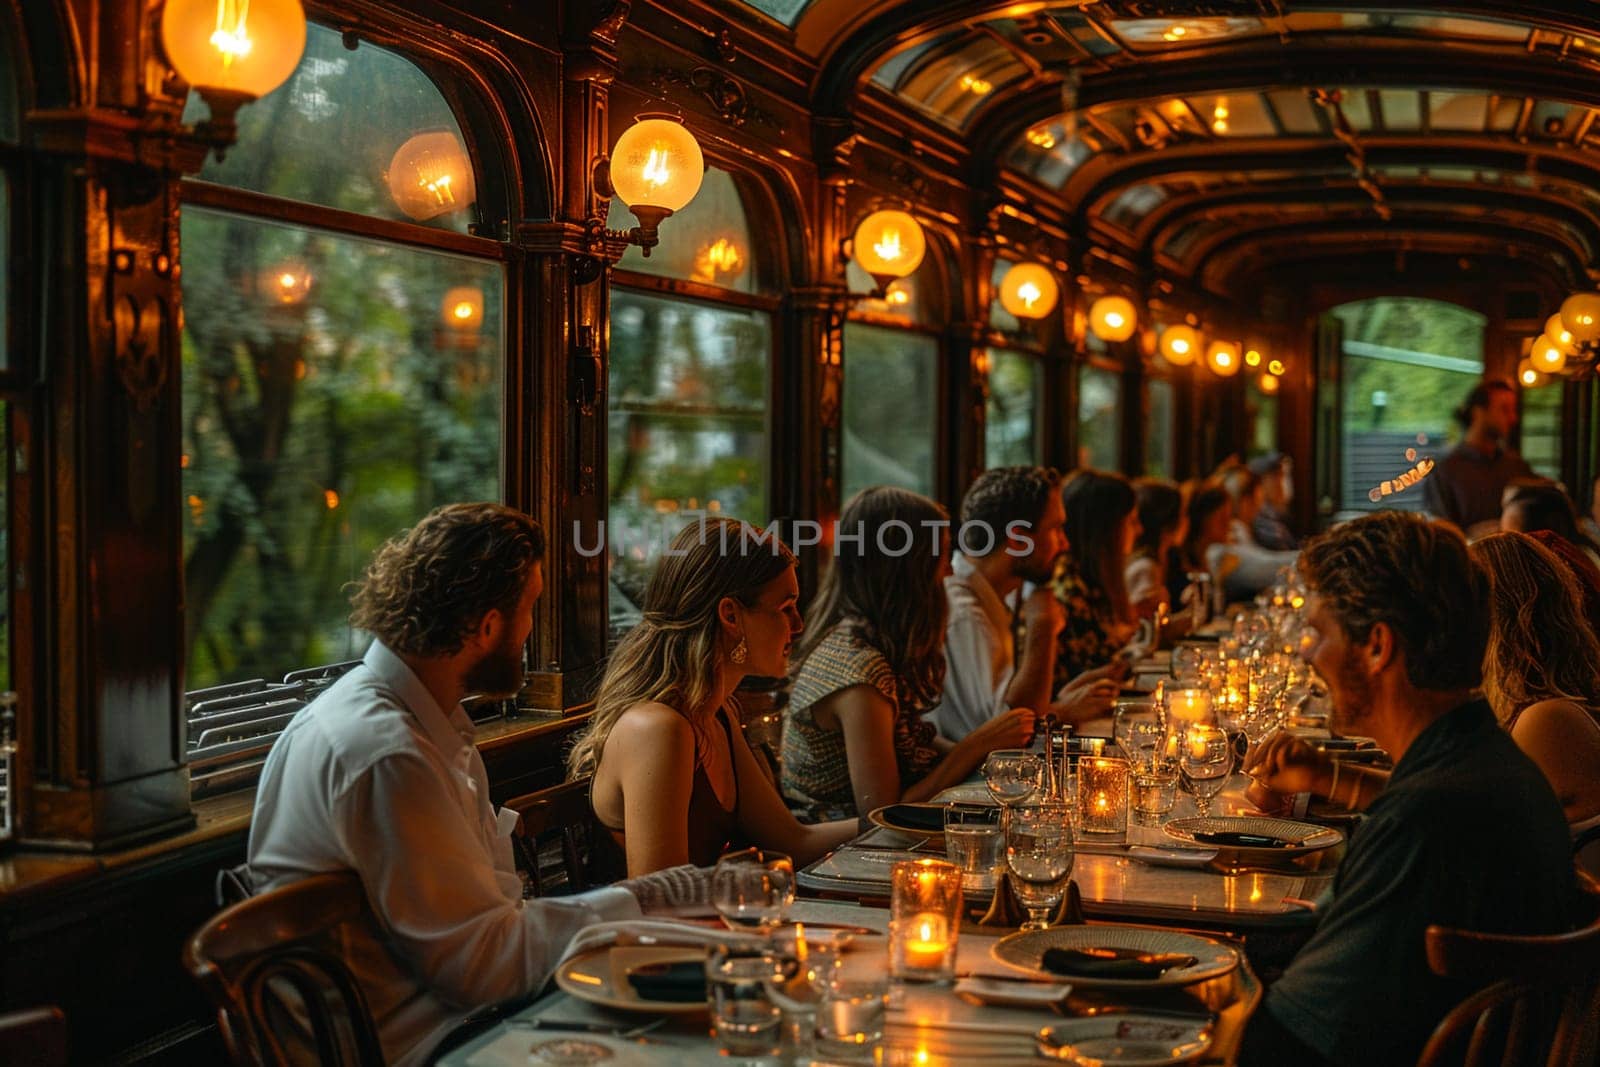 Vintage train car dining experience with period details and intimate seating by Benzoix